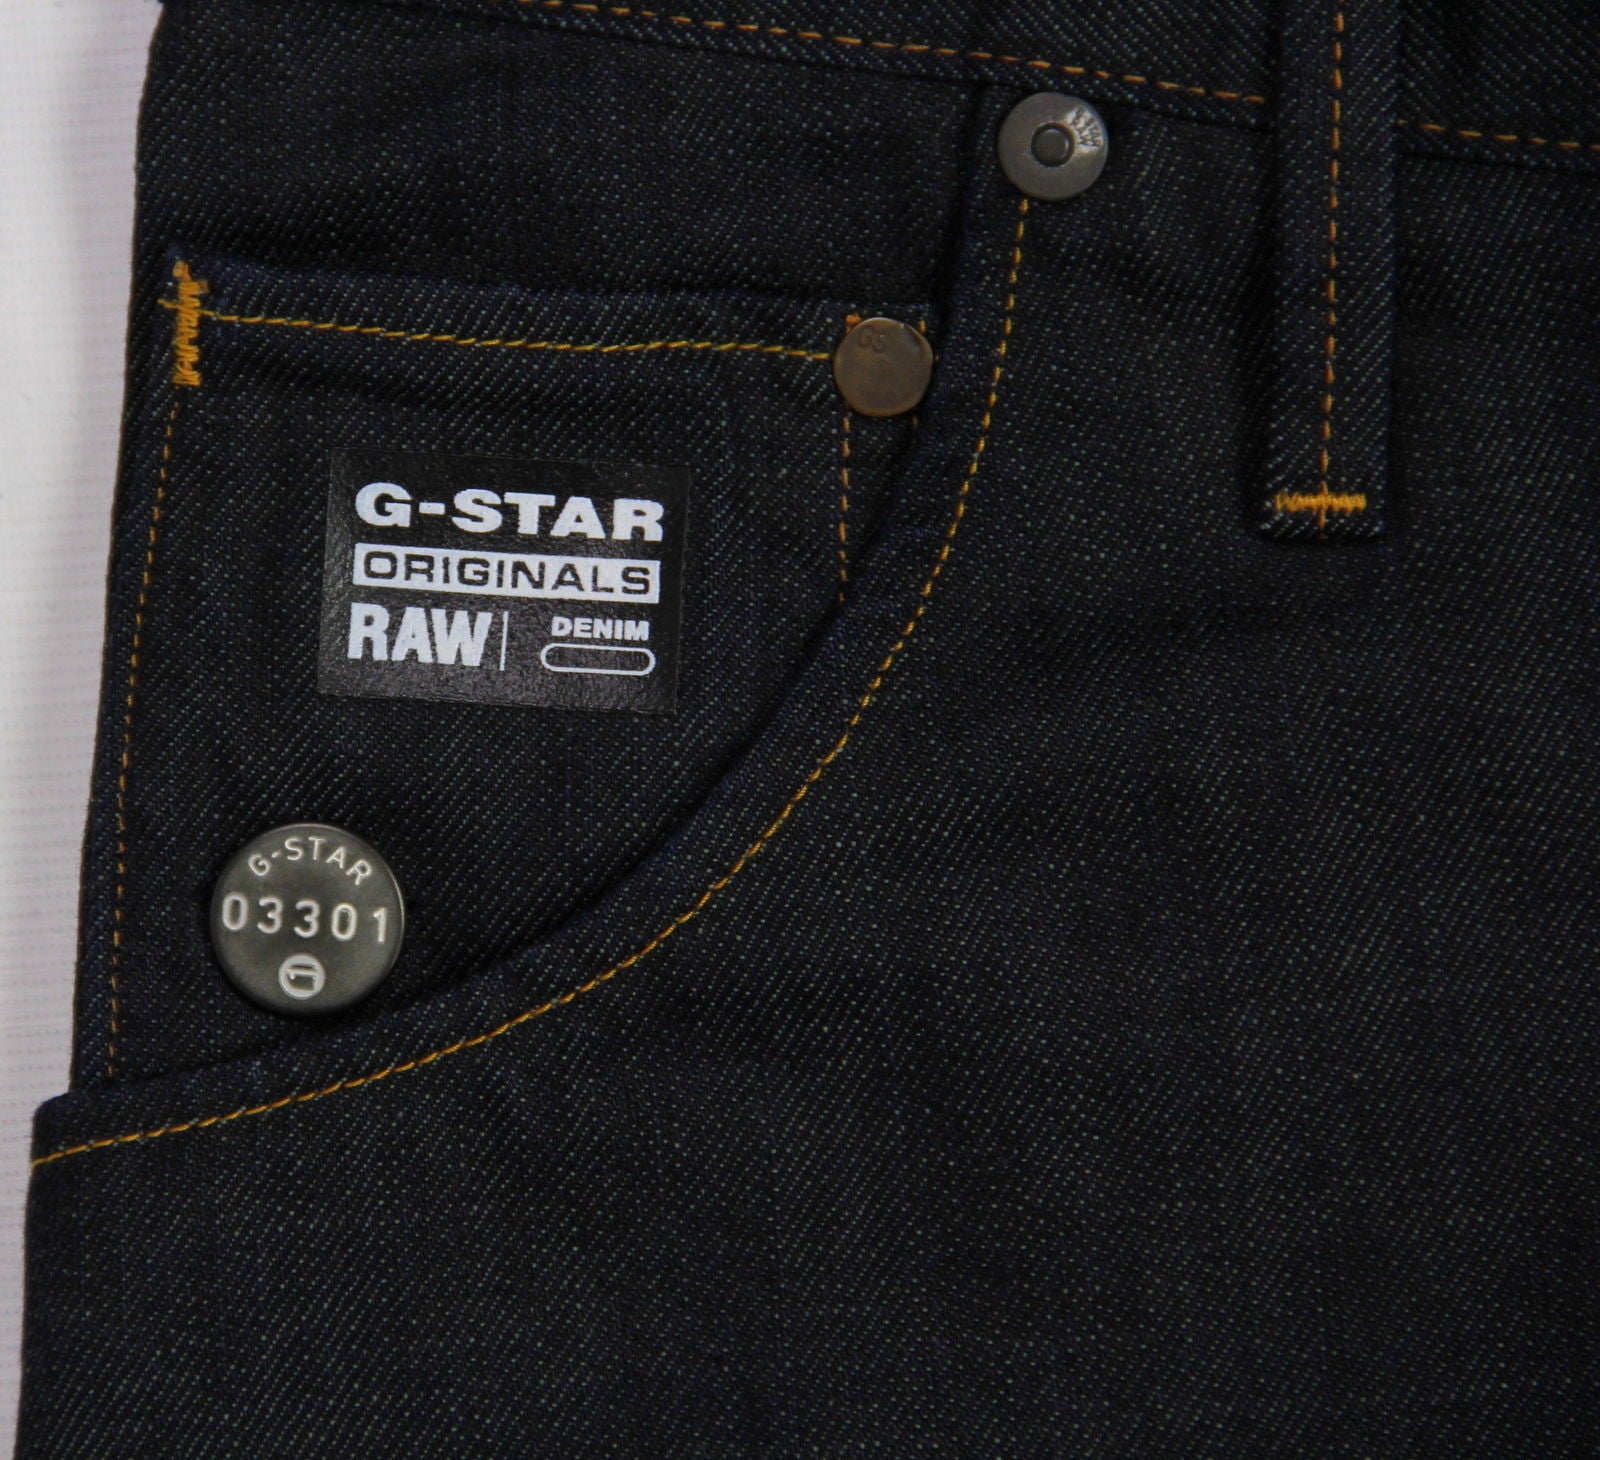 G-STAR men's dark blue NEW jeans SIZE 28/30 - secondfirst